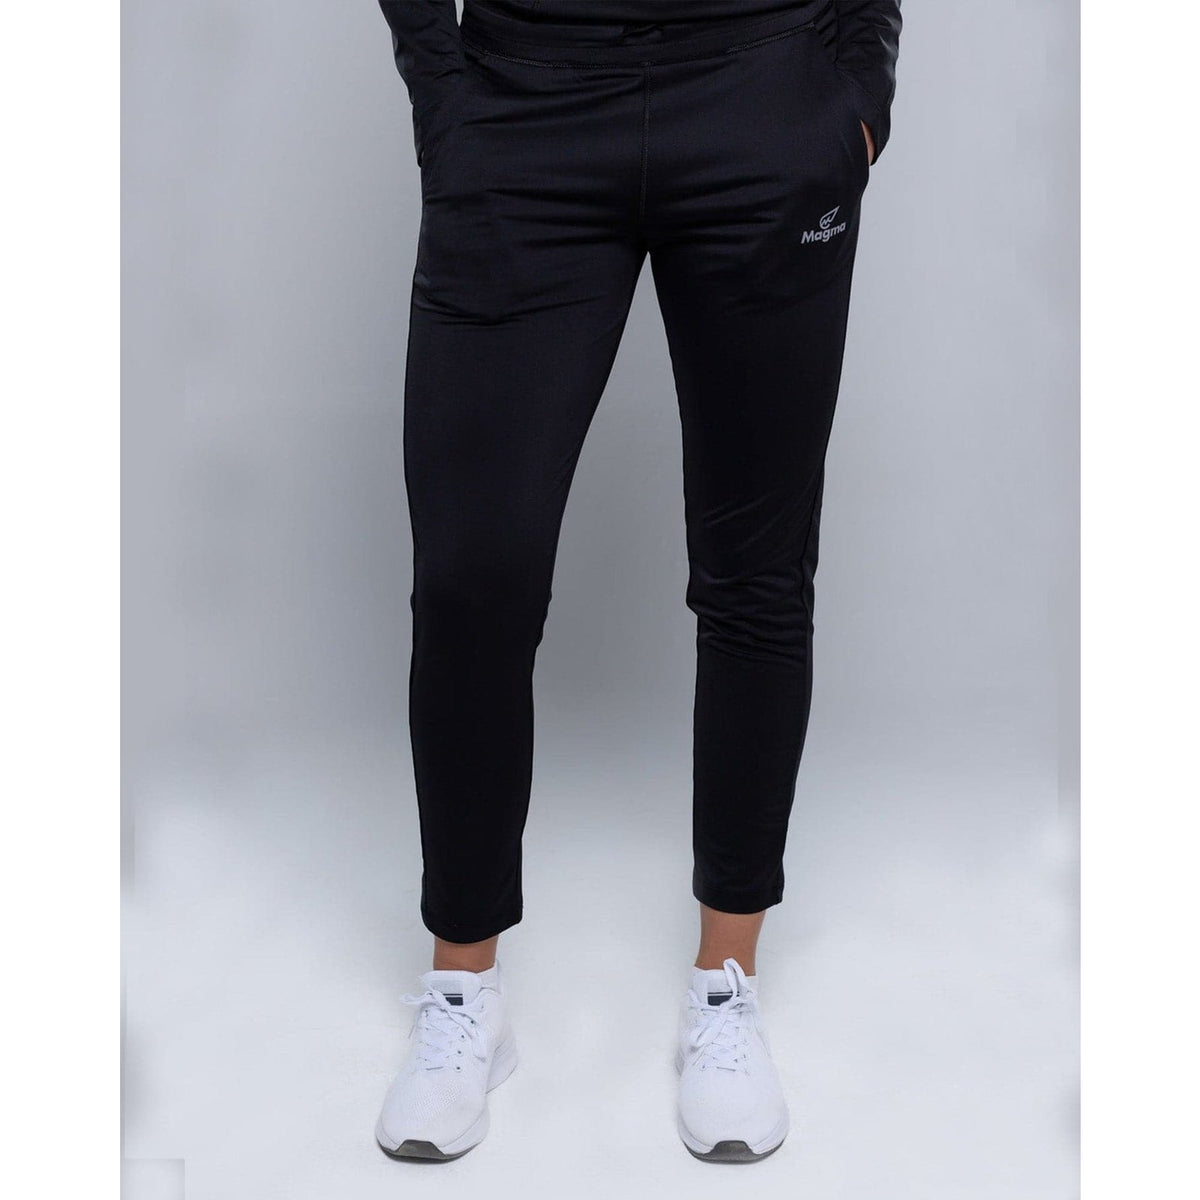 Everyday Jogger in Black - Sporty Pro